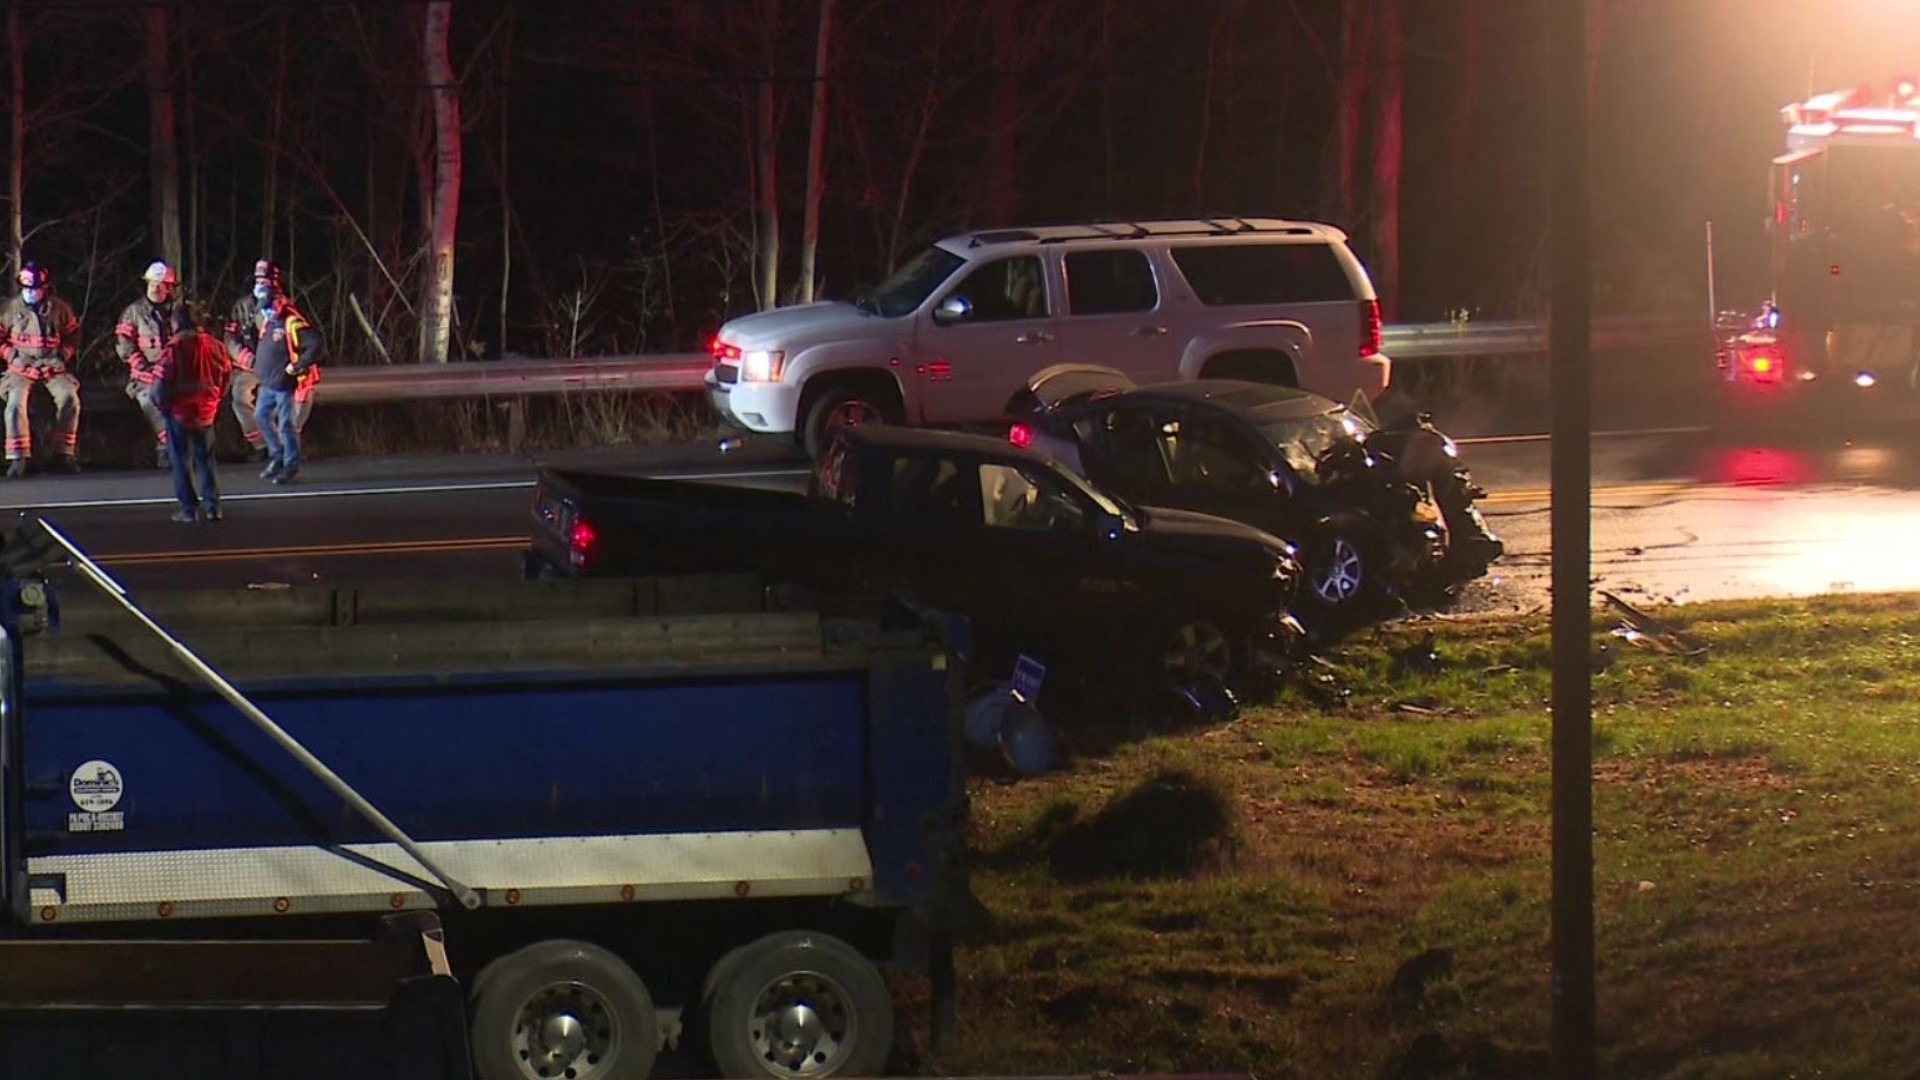 Route 309 near Noxen is closed after a deadly crash.